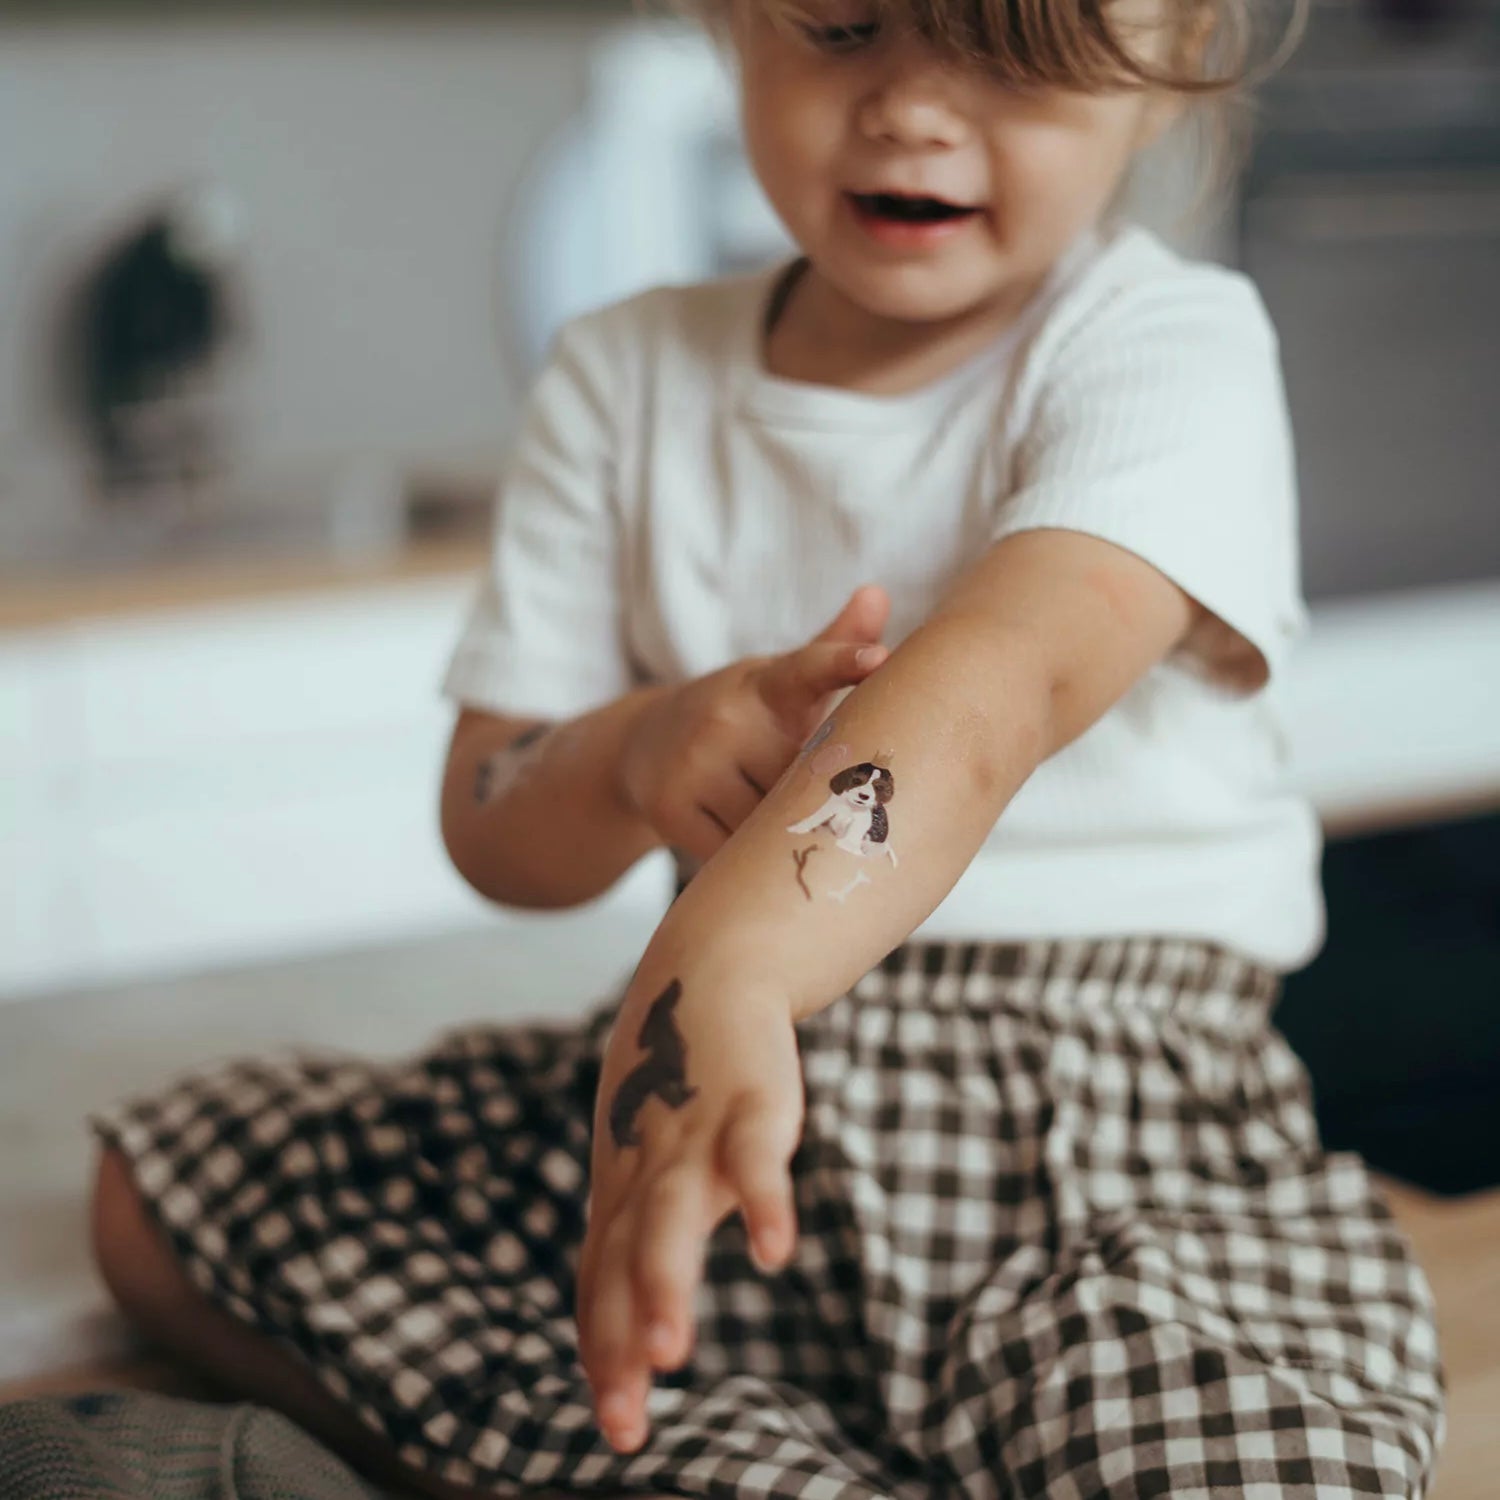 Bio Tattoo- Hunde find Stylish Fashion for Little People- at Little Foxx Concept Store